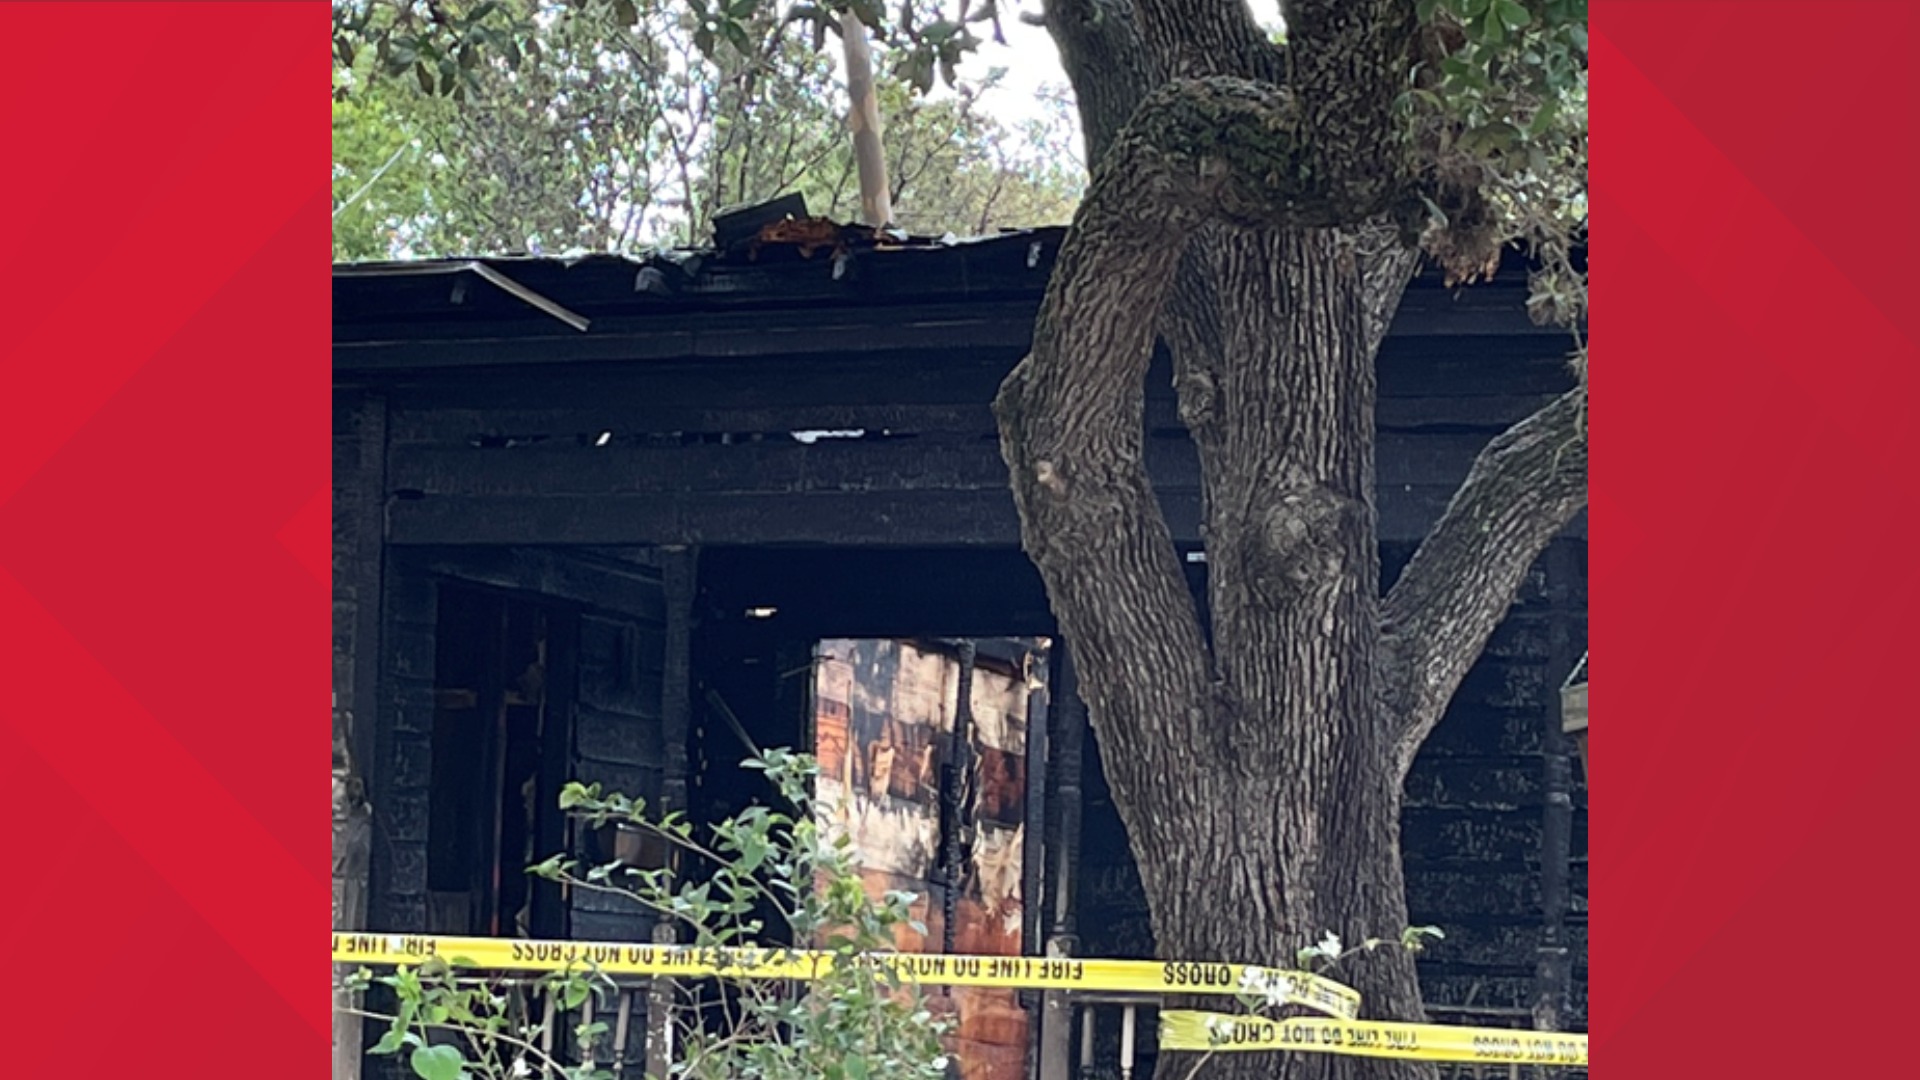 When fire crews arrived, they found the home engulfed in flames.